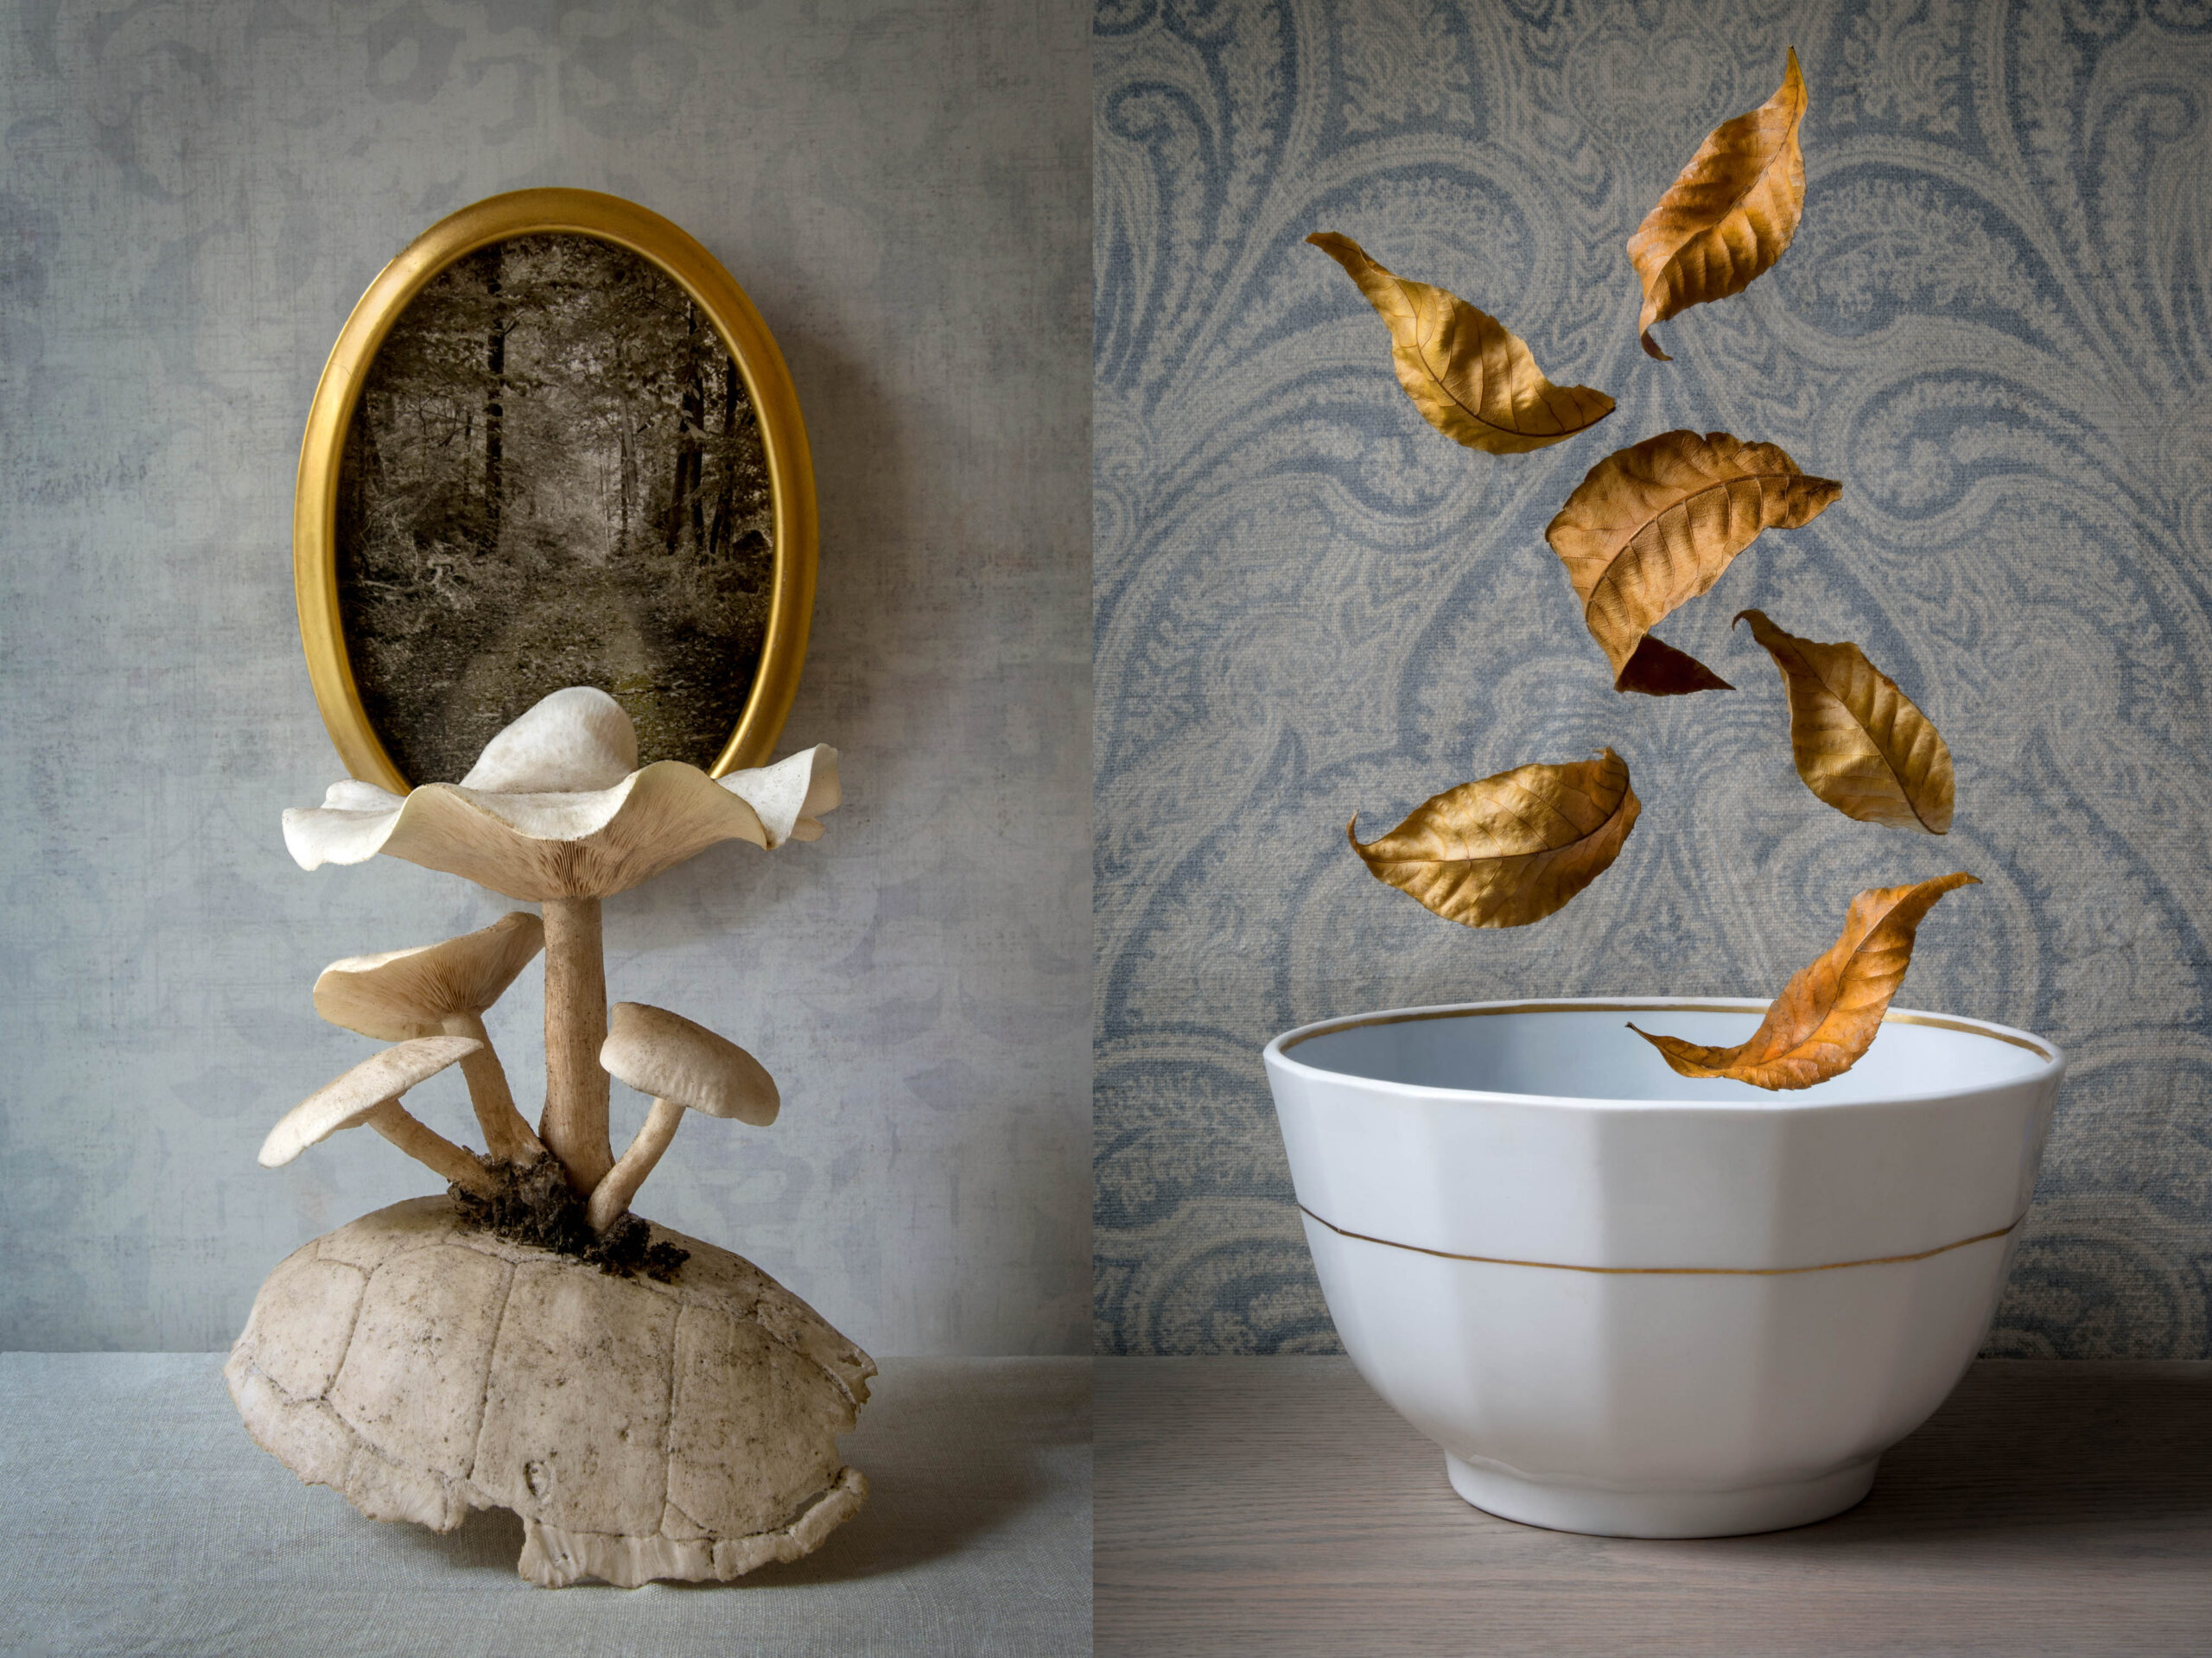 Two photographs merged show mushrooms in front of a circular frame, beside a white bowl with leaves floating into it against a blue patterned wallpaper.